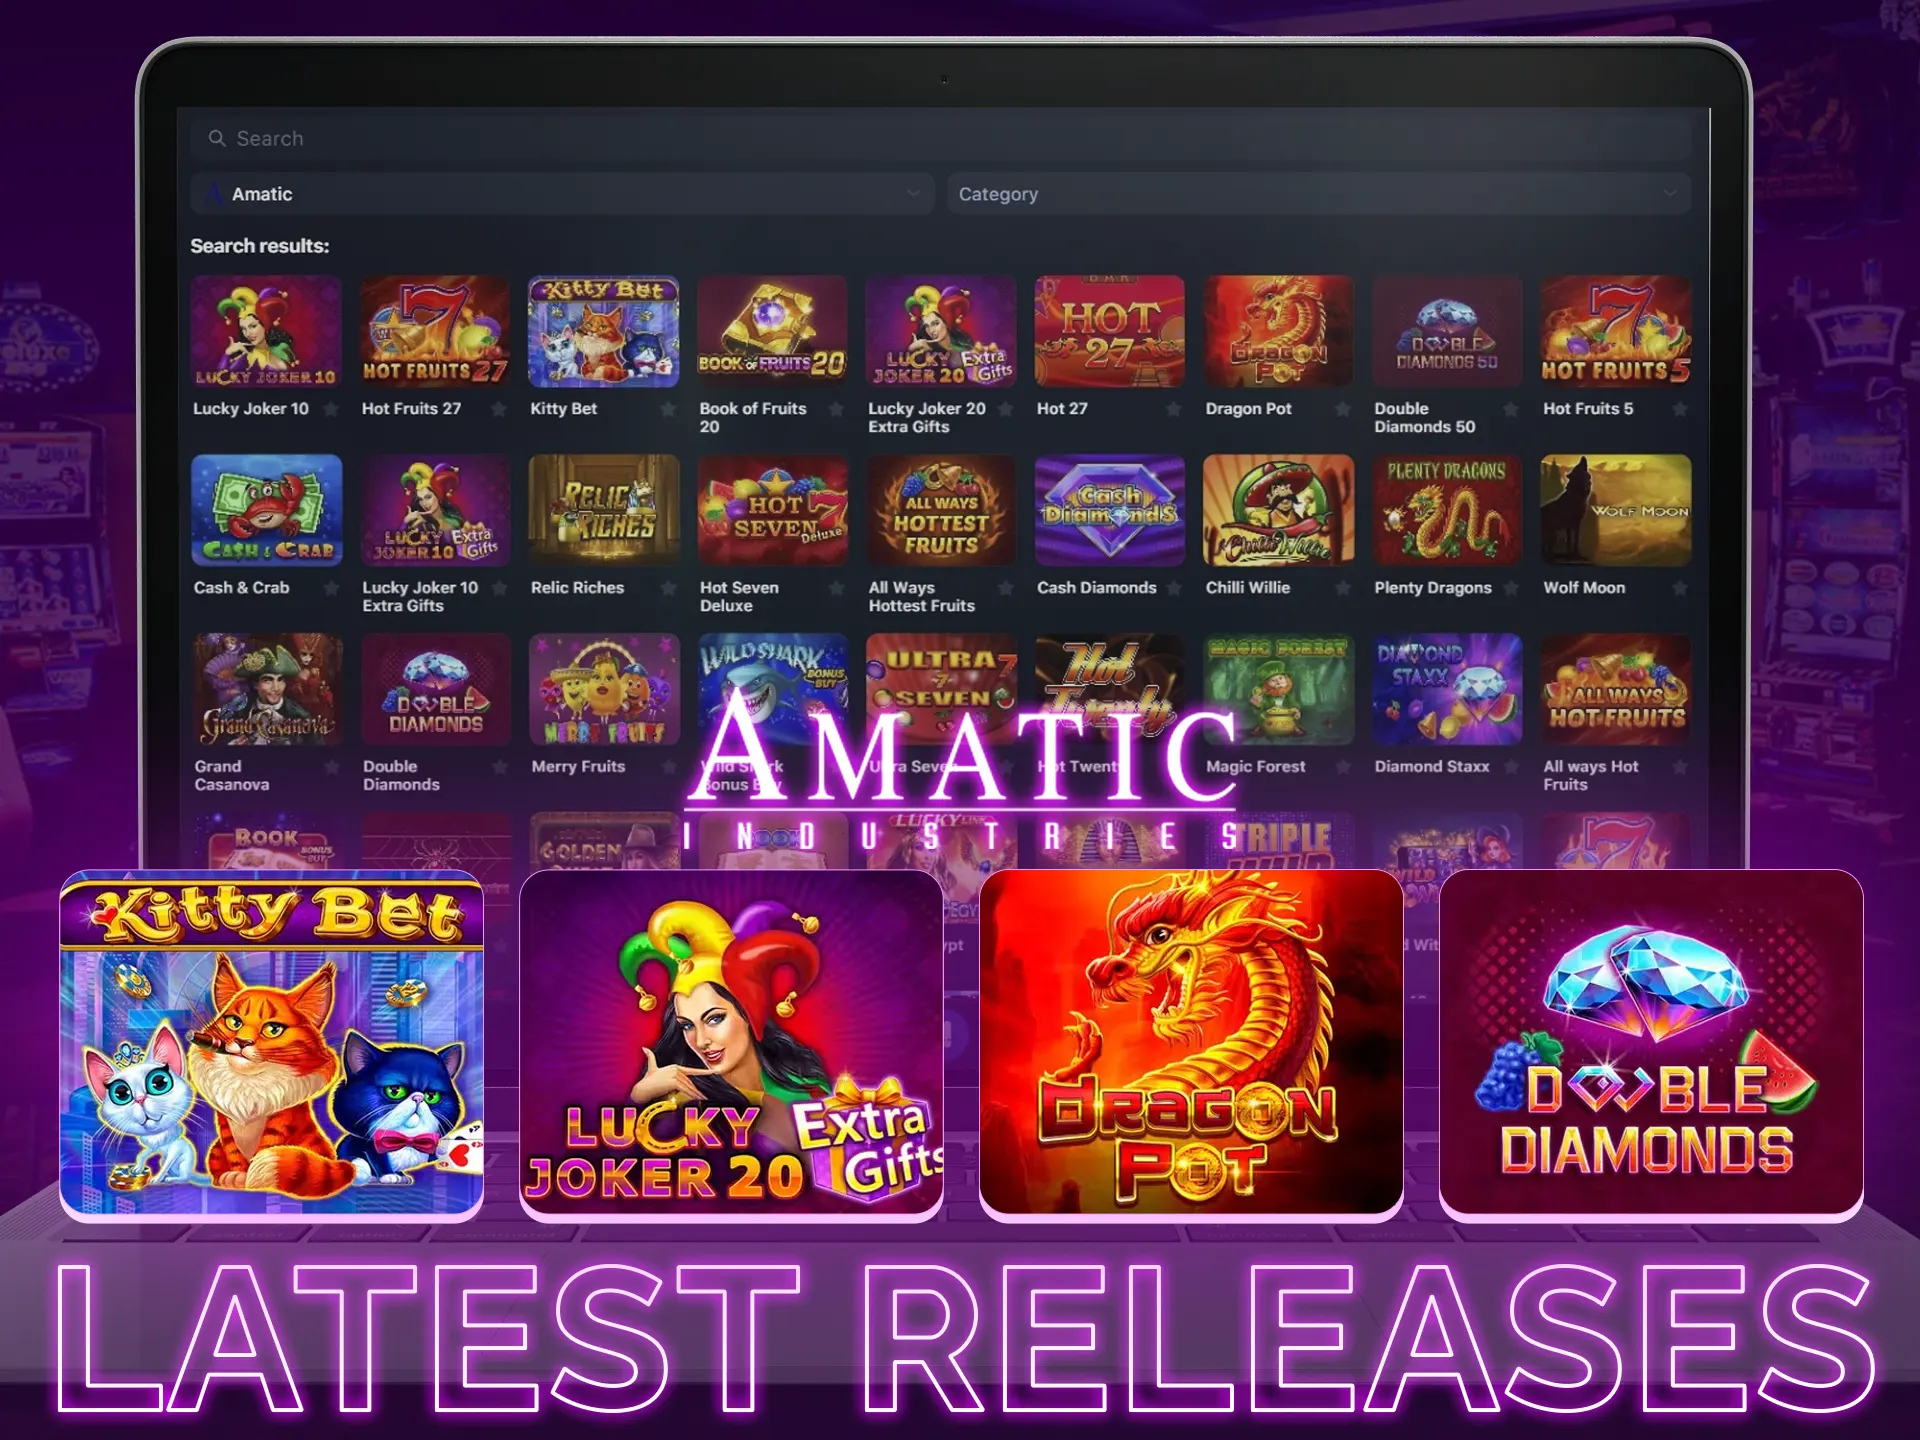 Enjoy new Amatic releases.